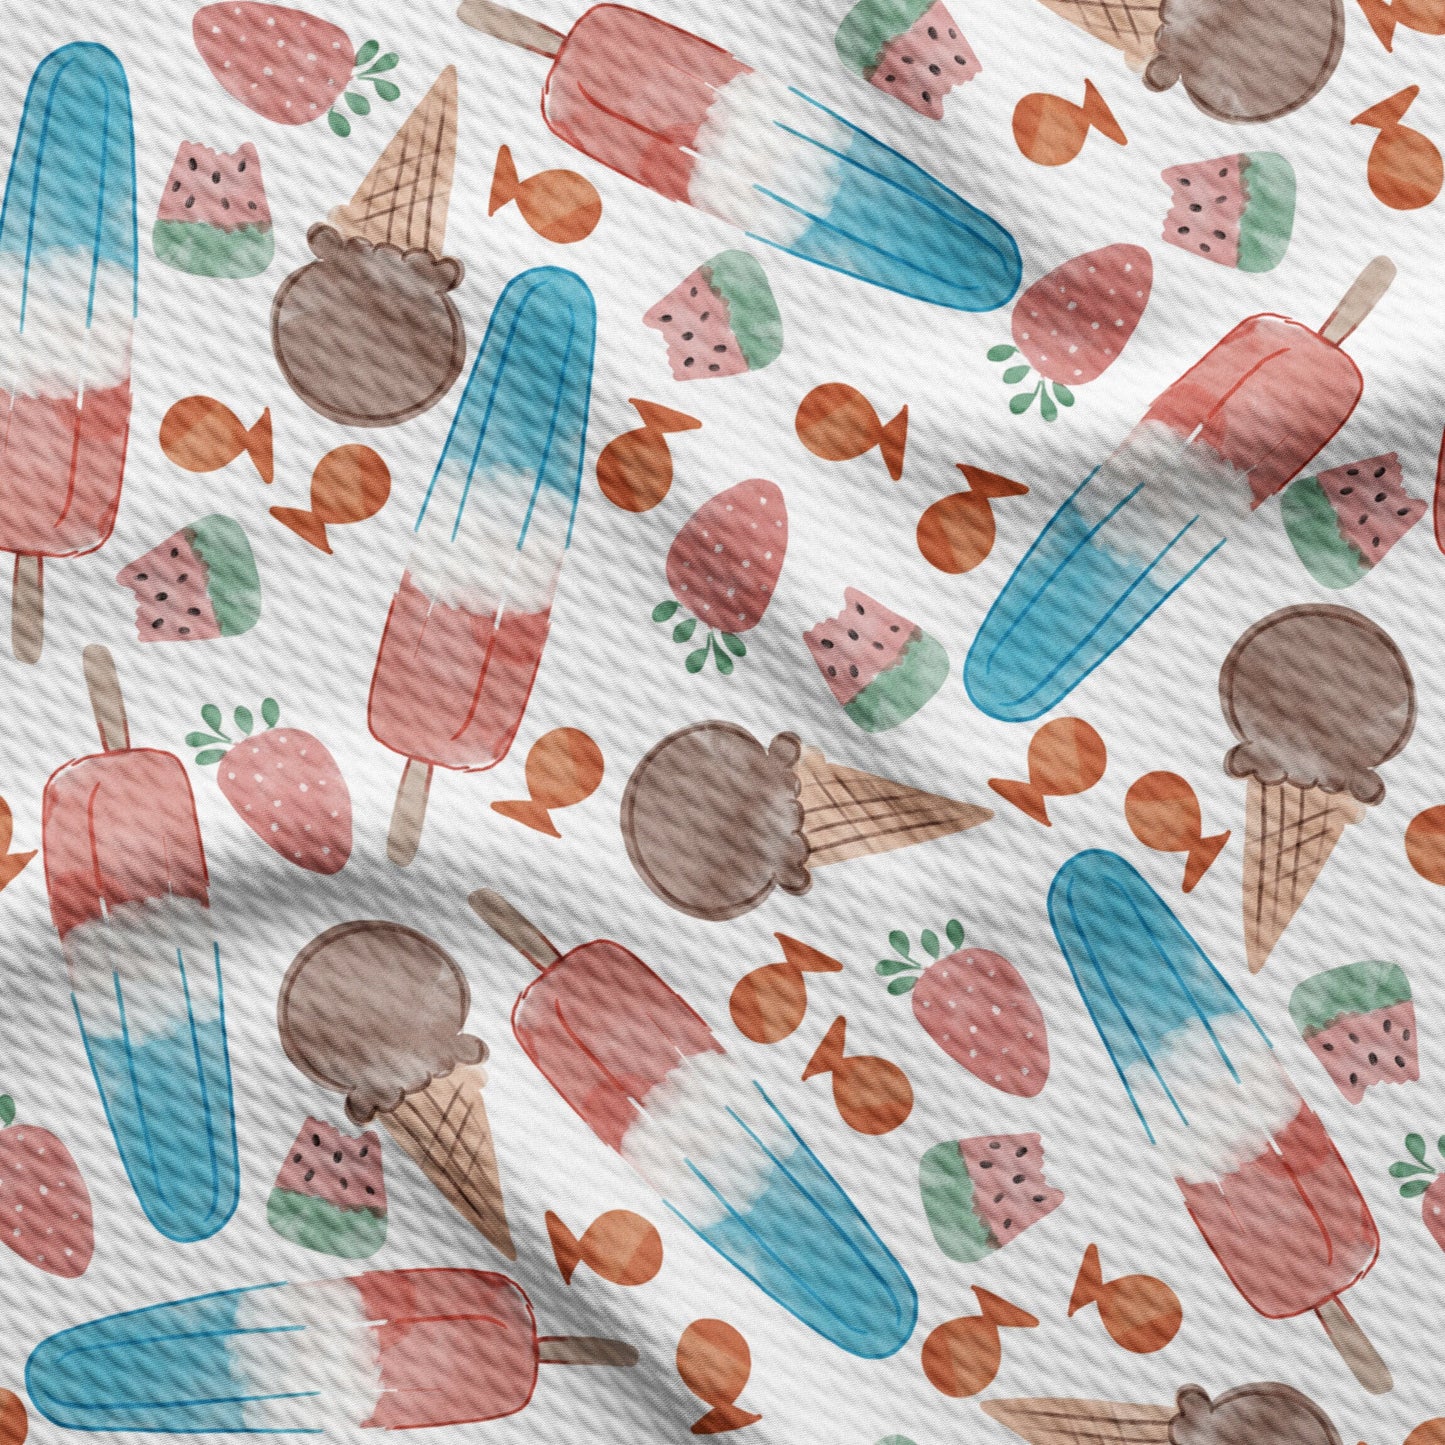 Ice Cream Patriotic 4th of July Liverpool Bullet Textured Fabric by the yard Stretch Fabric PT98